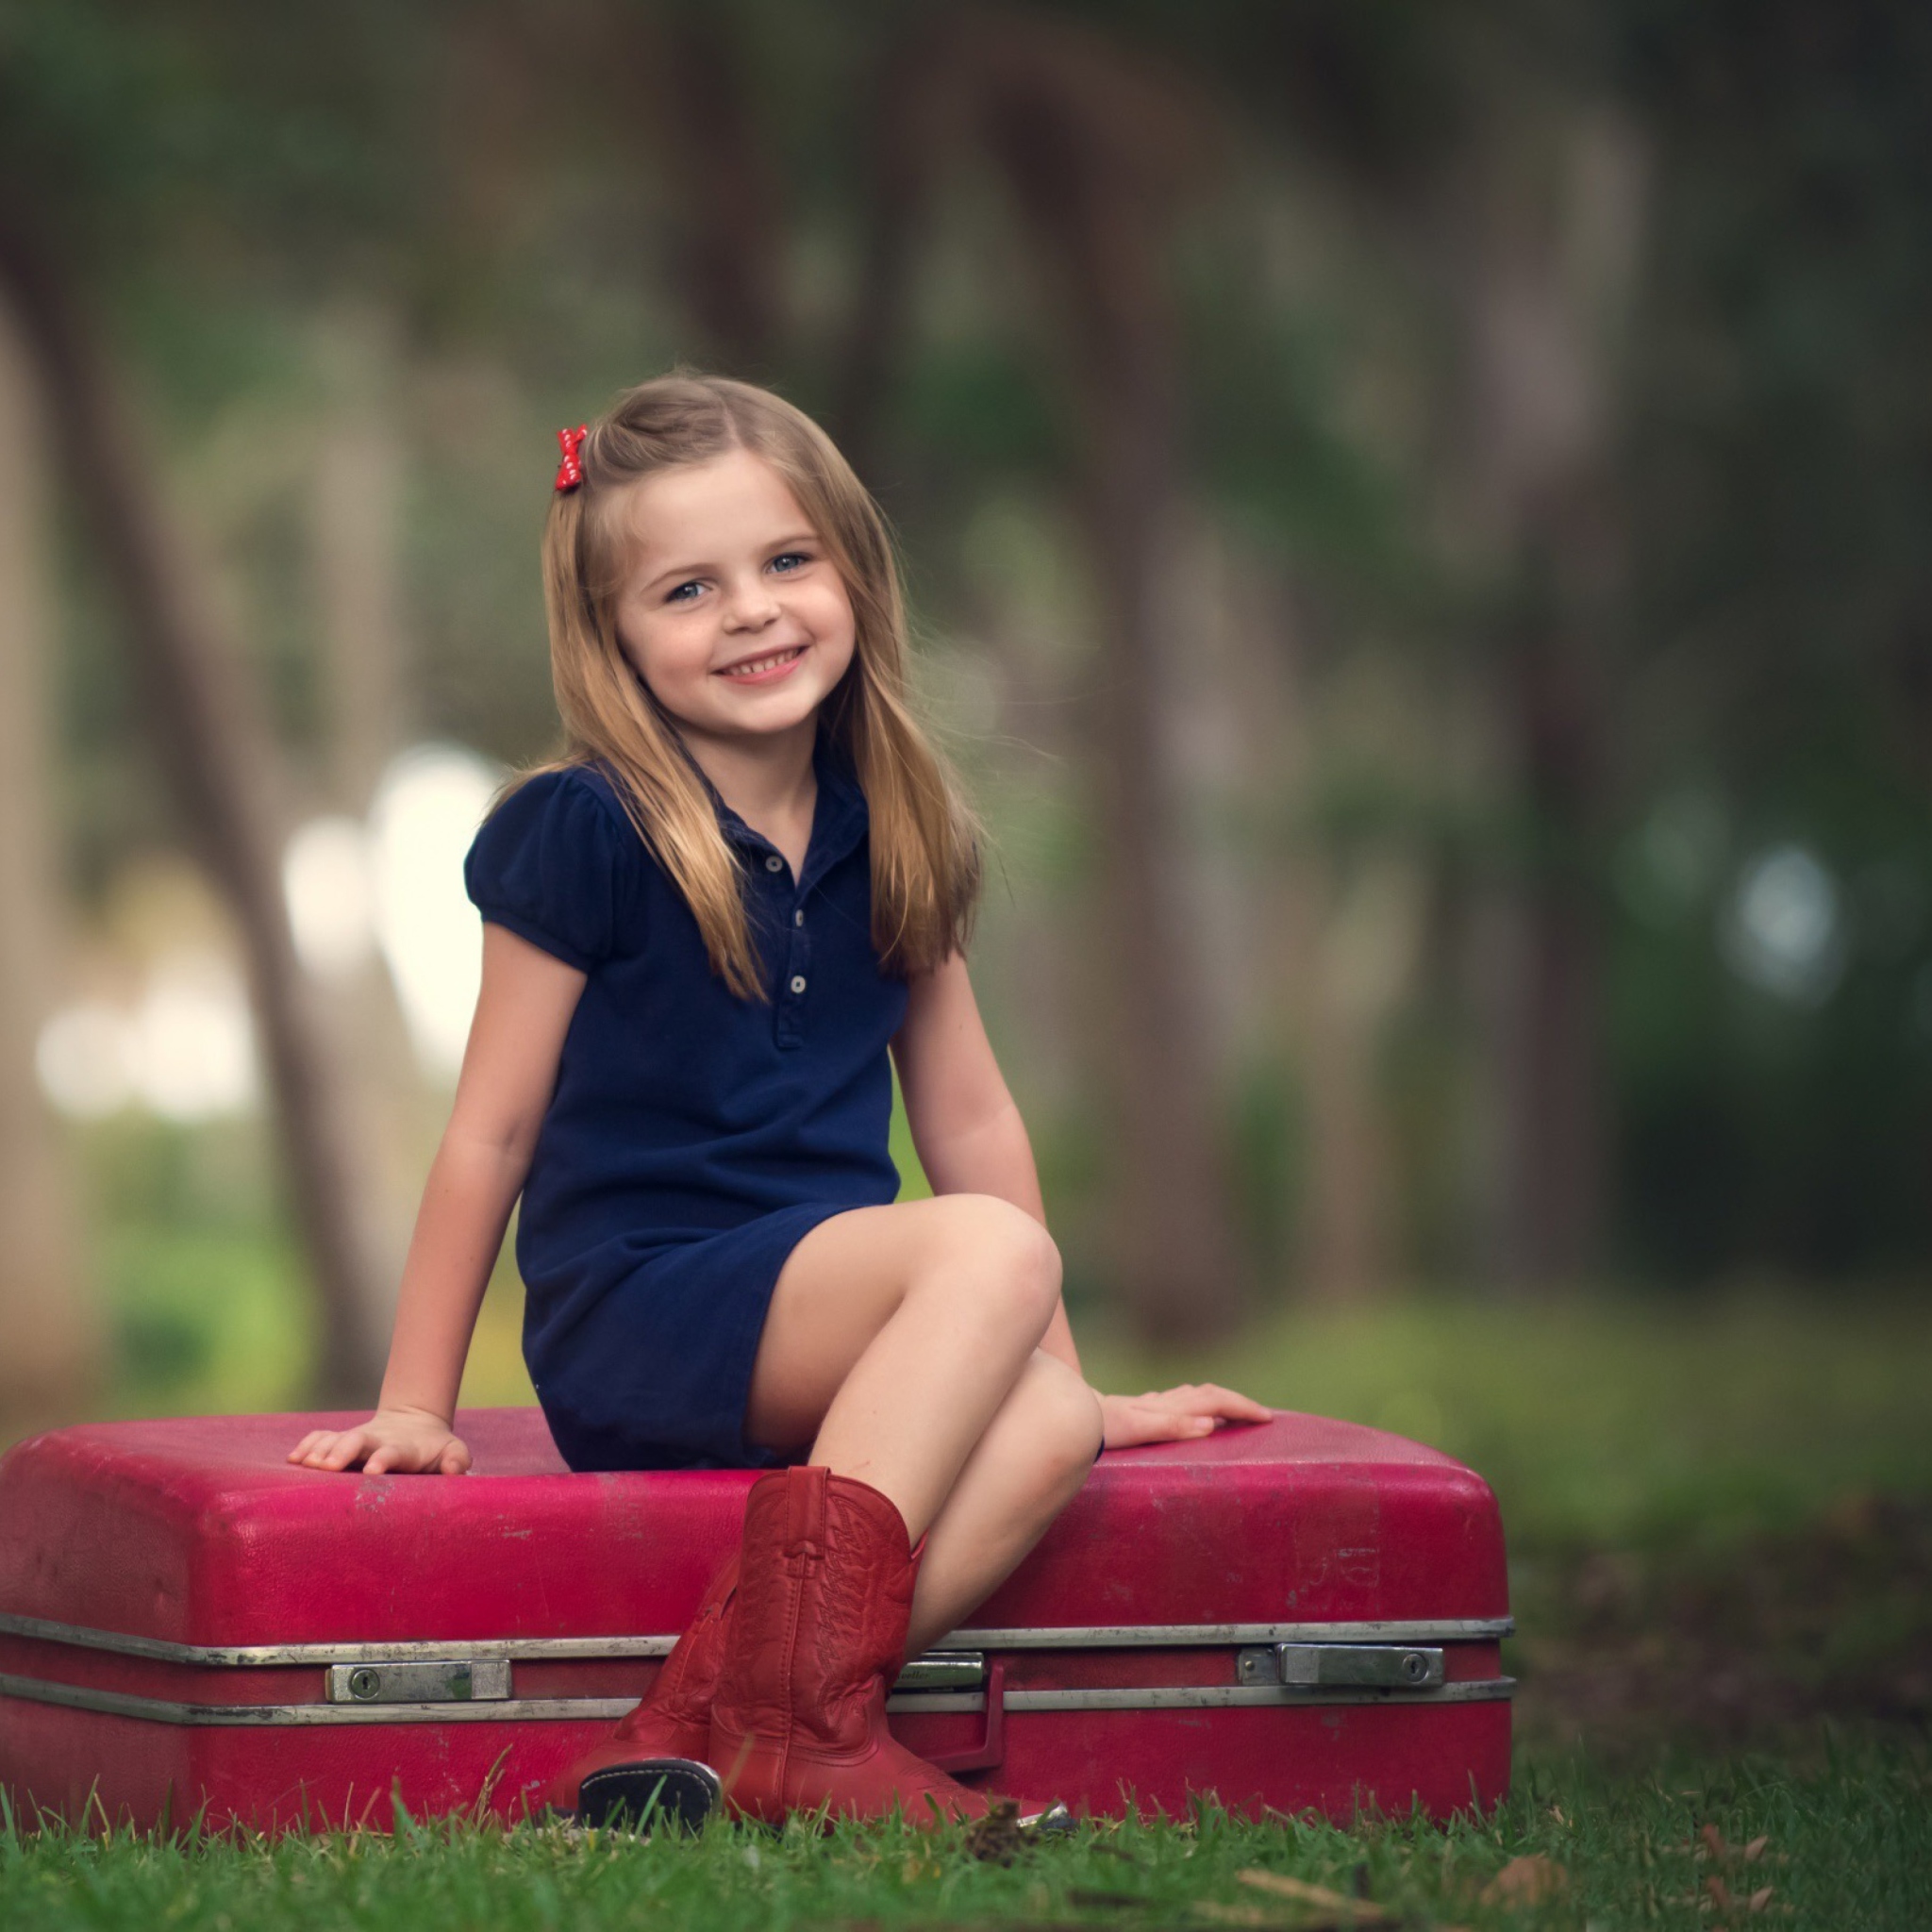 Little Girl Sitting On Red Suitcase wallpaper 2048x2048